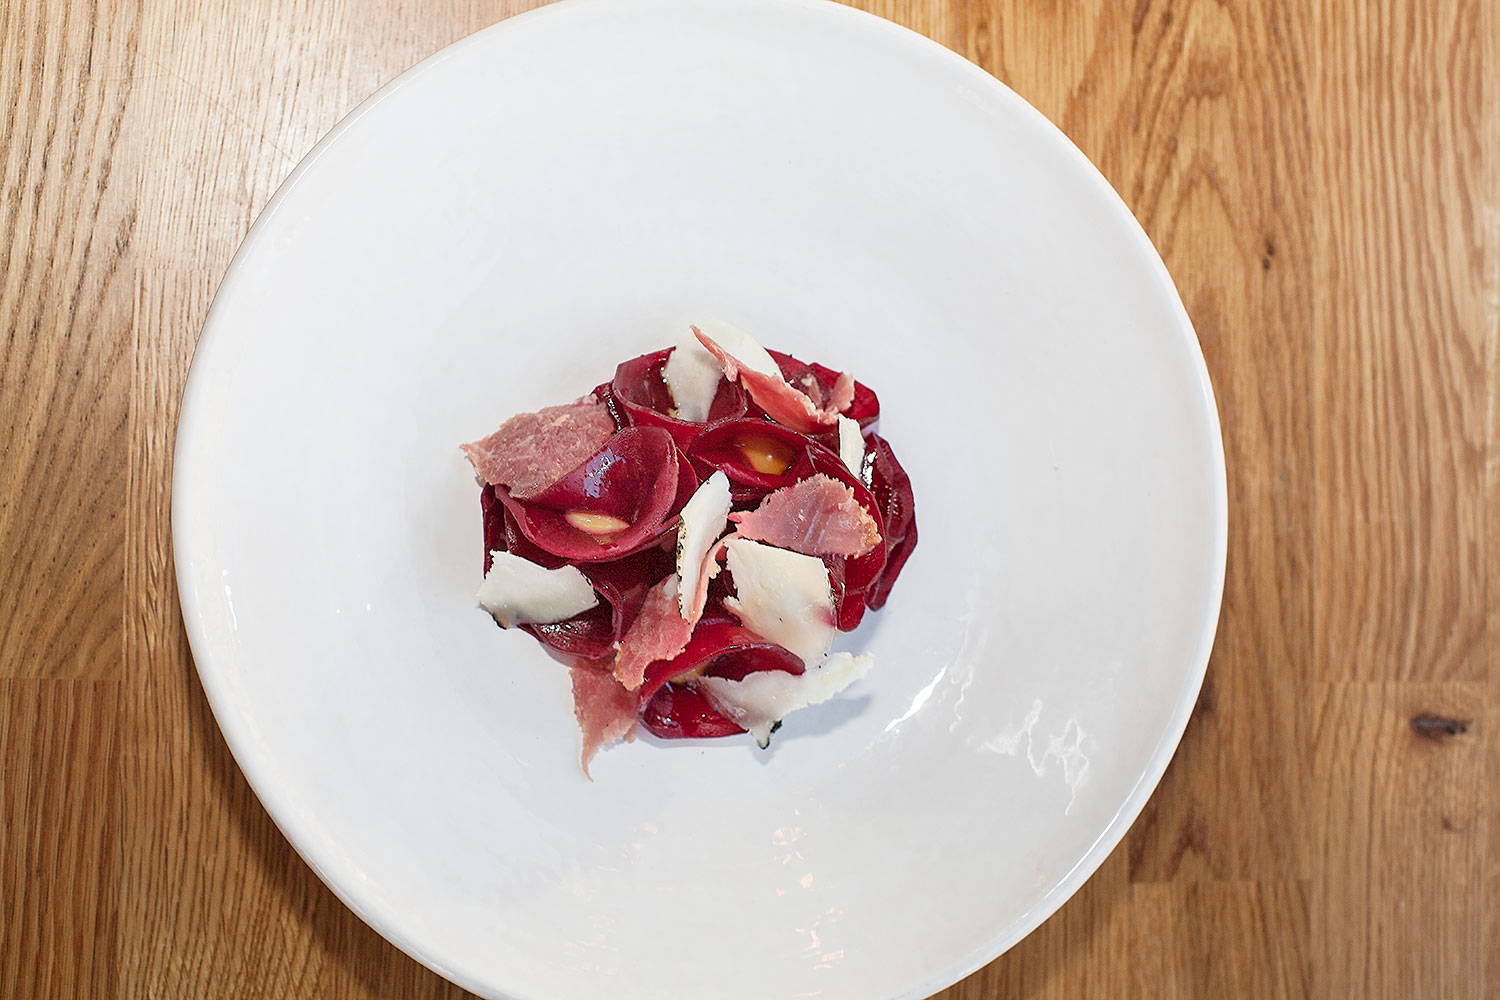 Beet Salad with house-made goat’s cheese and prosciutto.